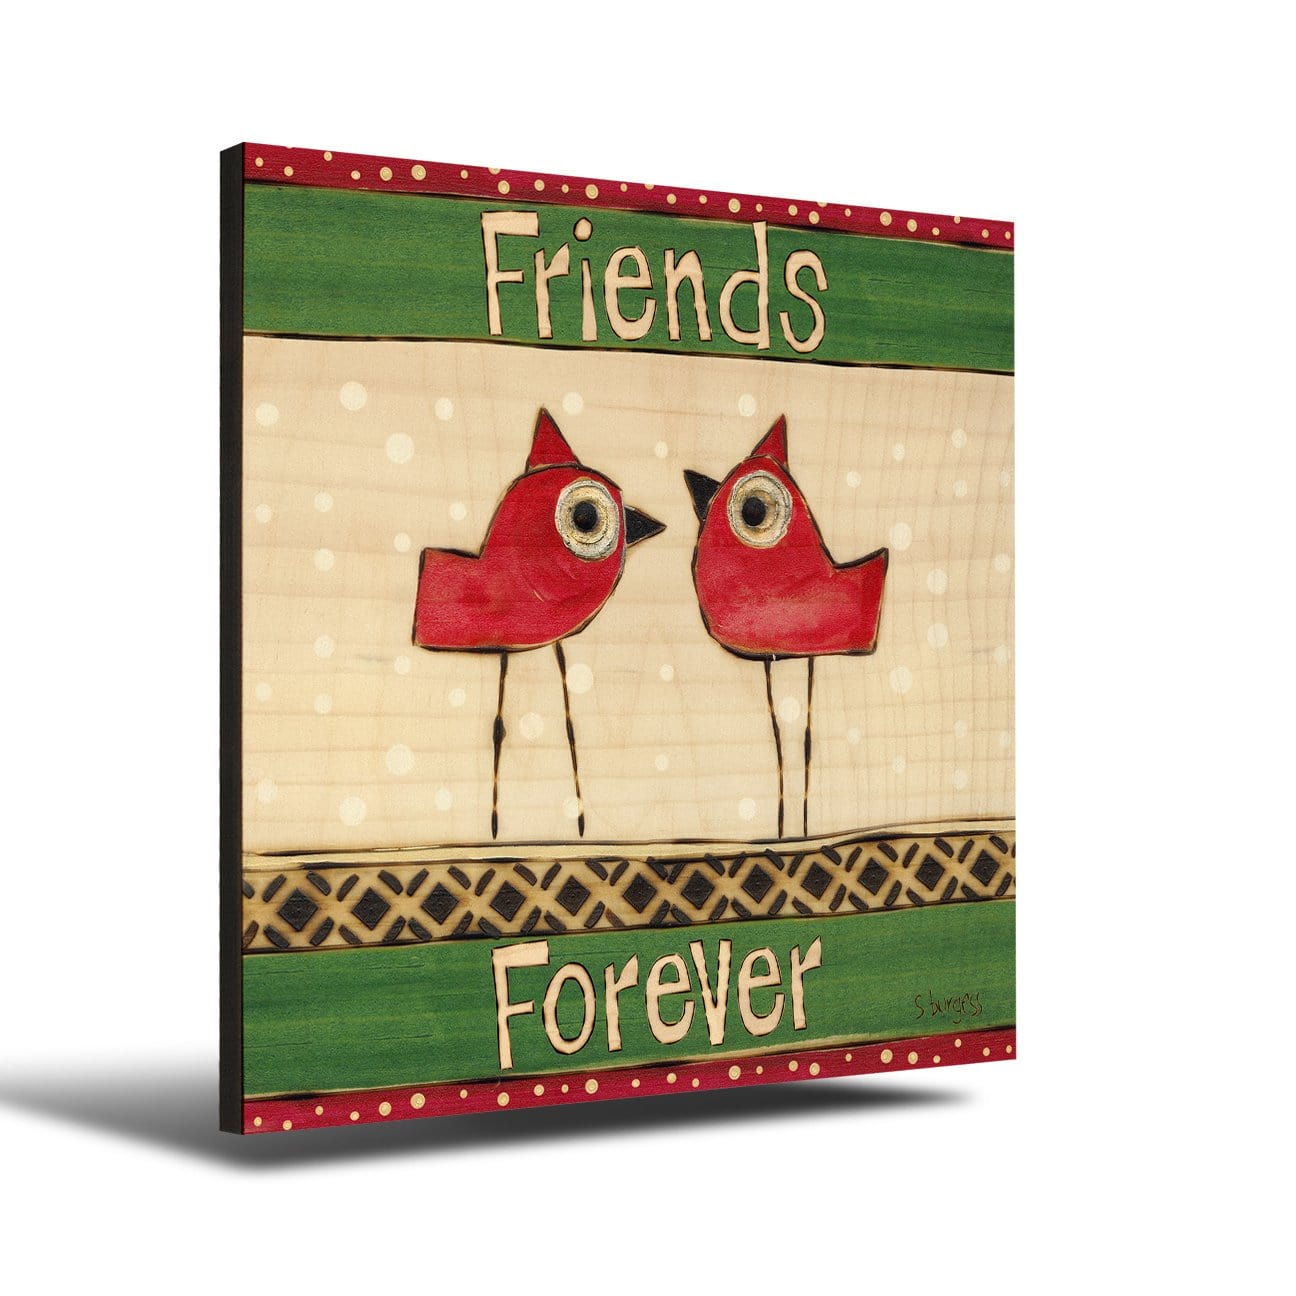 Friends Forever 12x12 Wall Art Painted Peace By Stephanie Burgess Daydreamhq